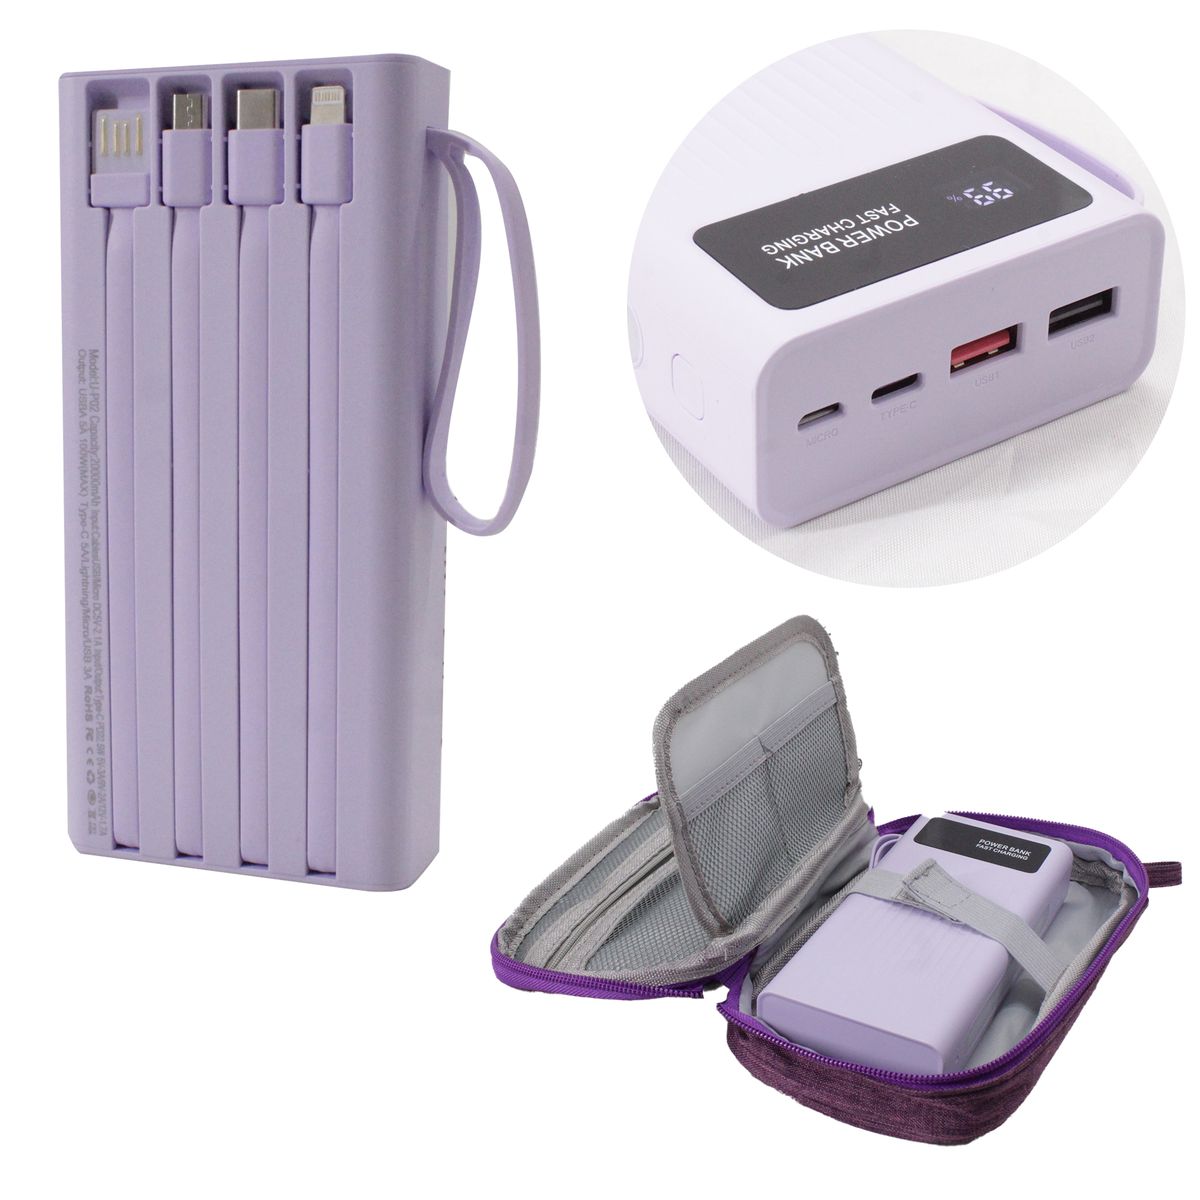 20000mAh 100W Fast Charge Powerbank with 4 Inbuilt USB Cables & Carry Pouch